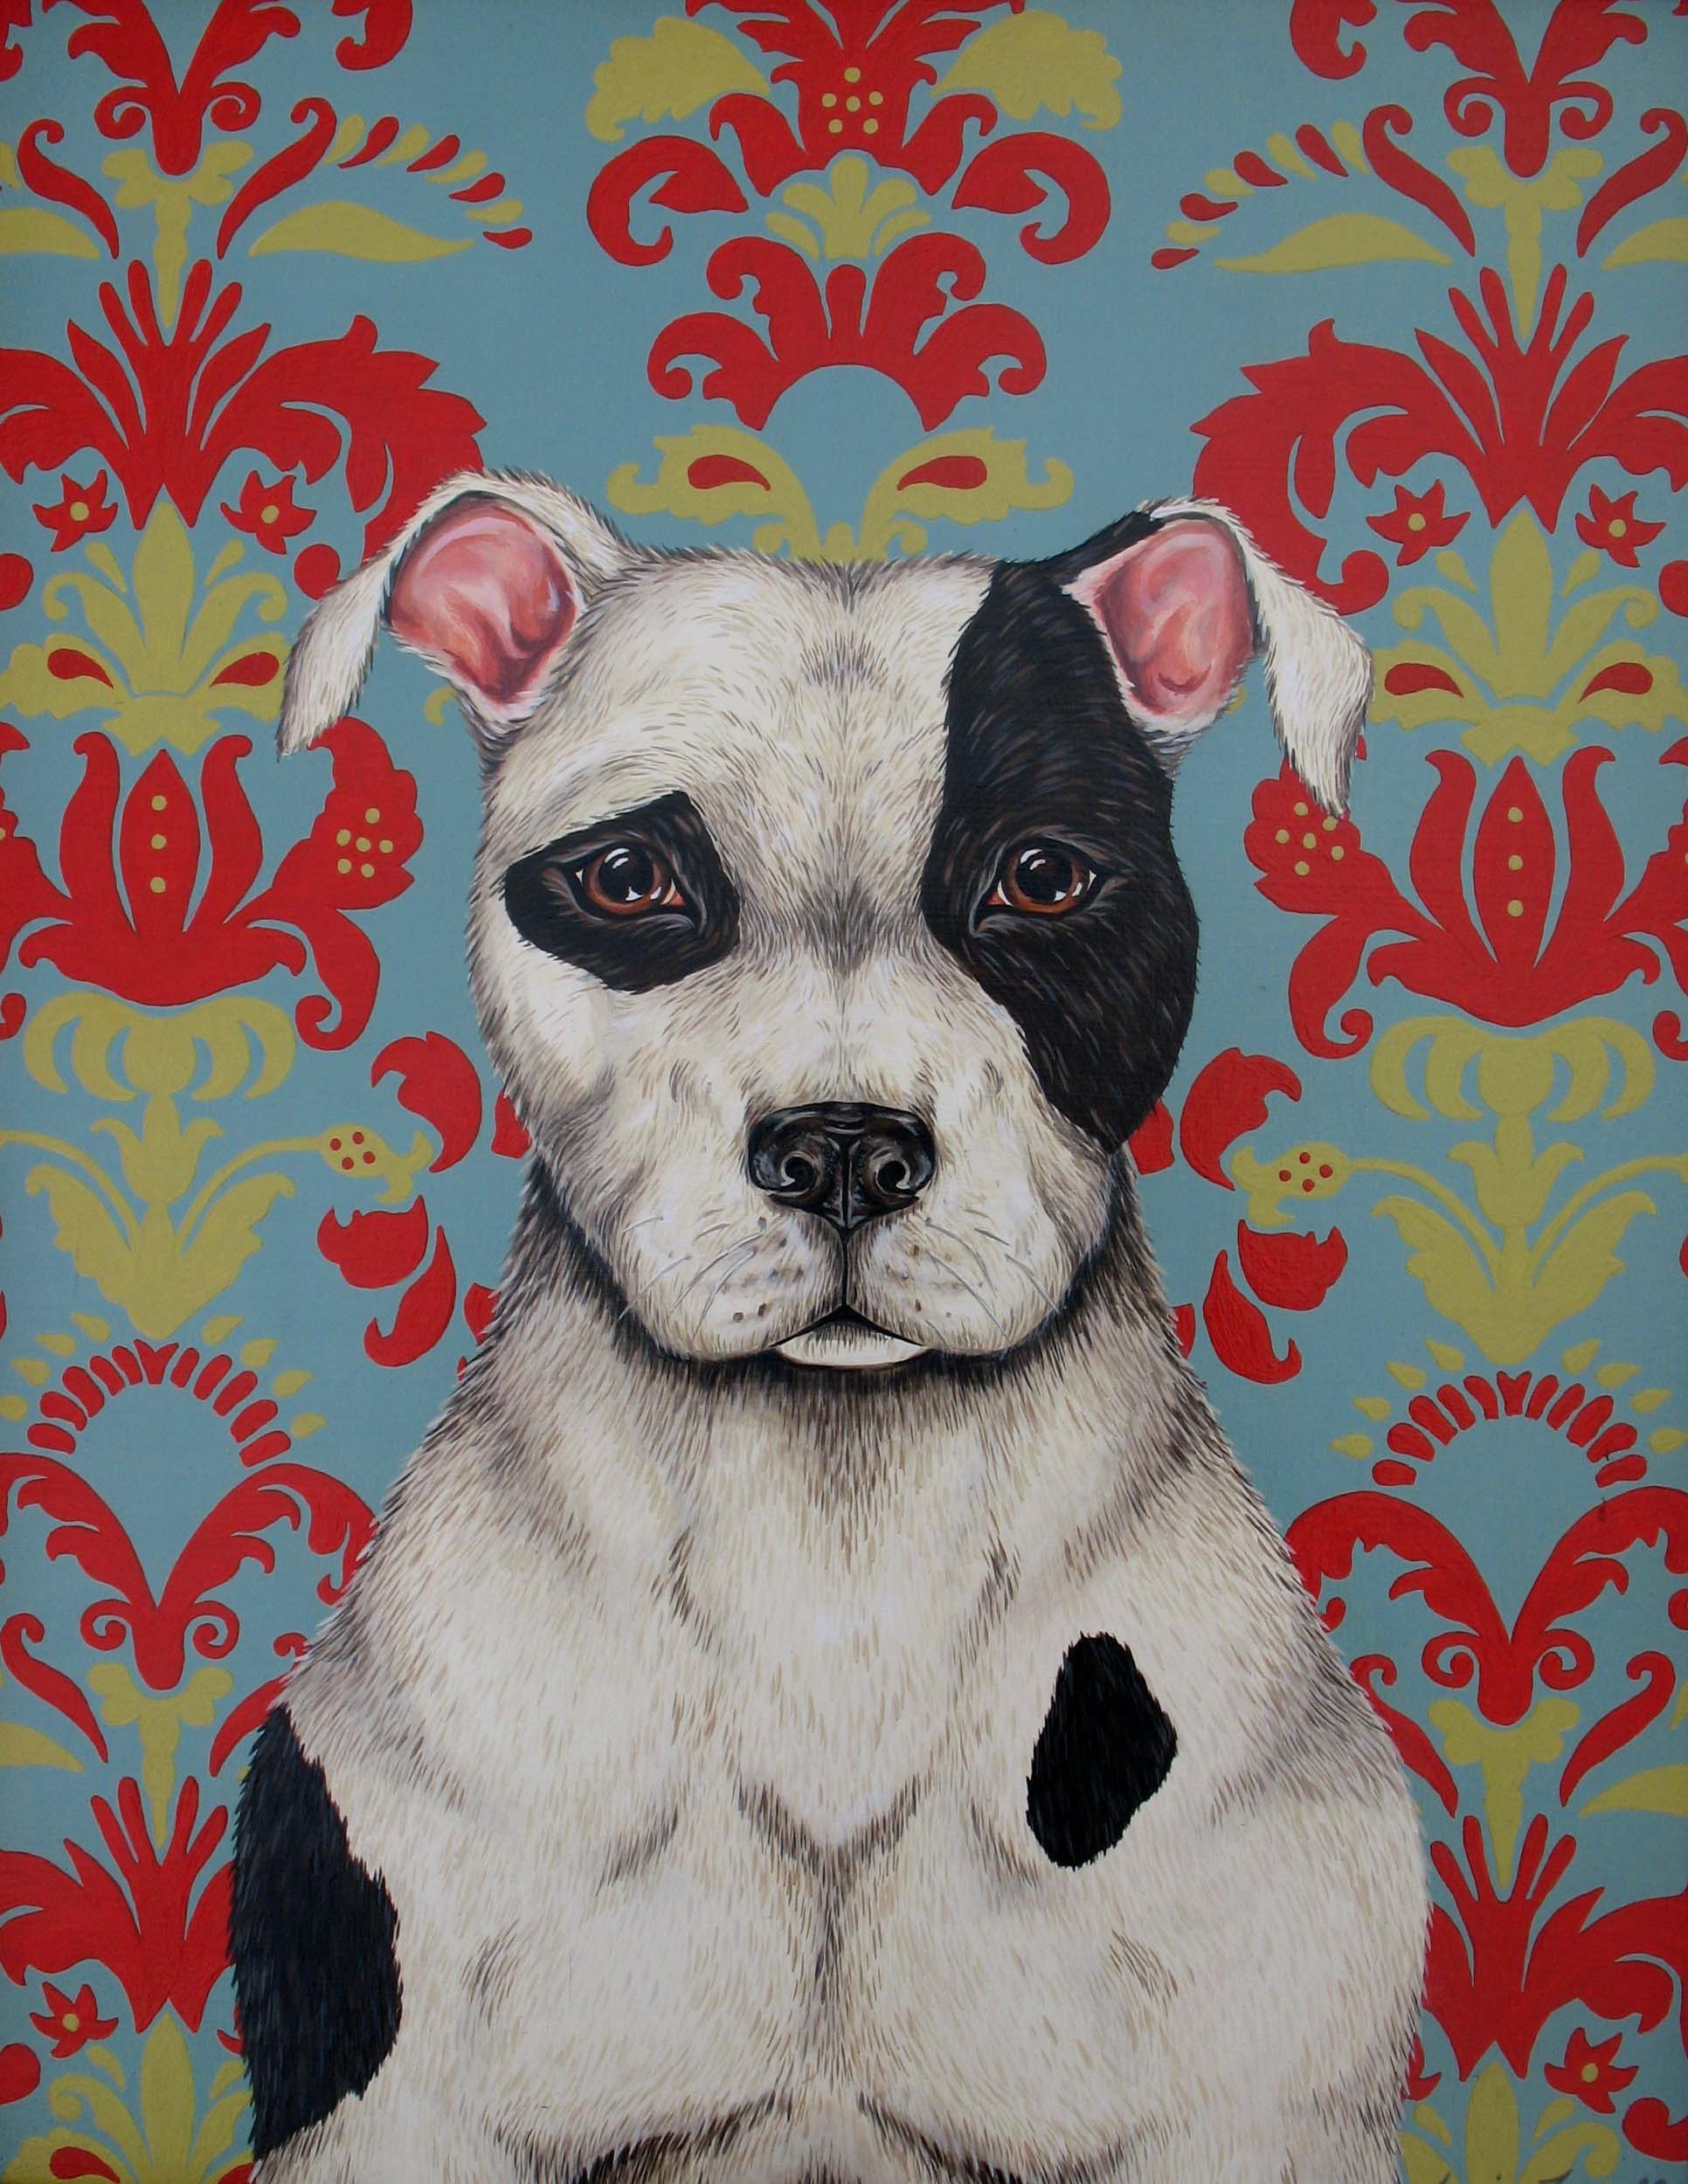   Pitbull , Acrylic on wood, 18 x 14 inches  (private collection) 